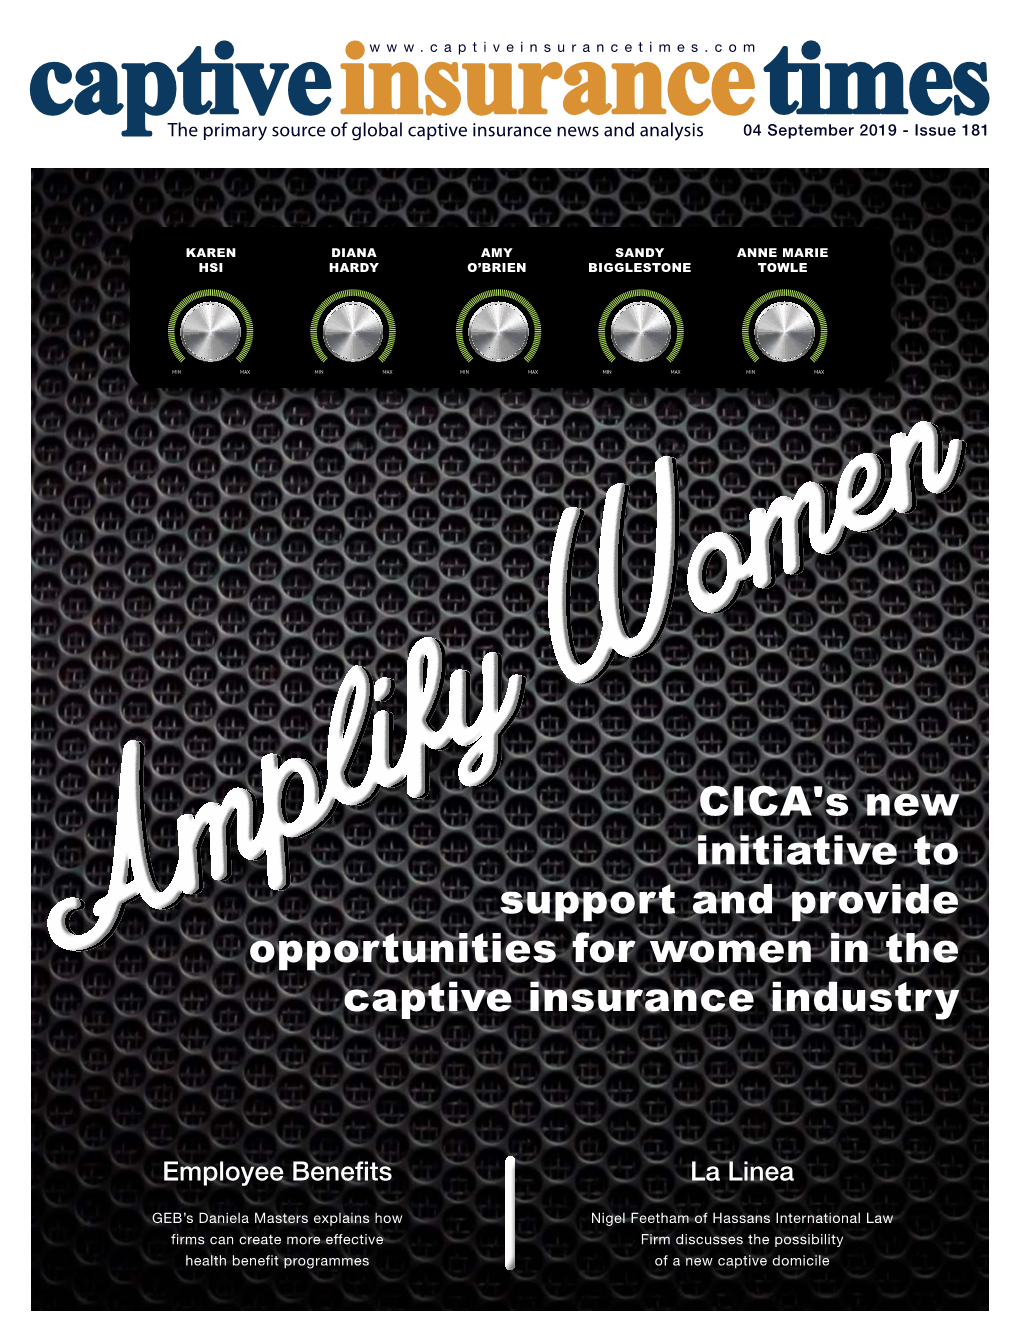 CICA's New Initiative to Support and Provide Opportunities for Women in the Captive Insurance Industry